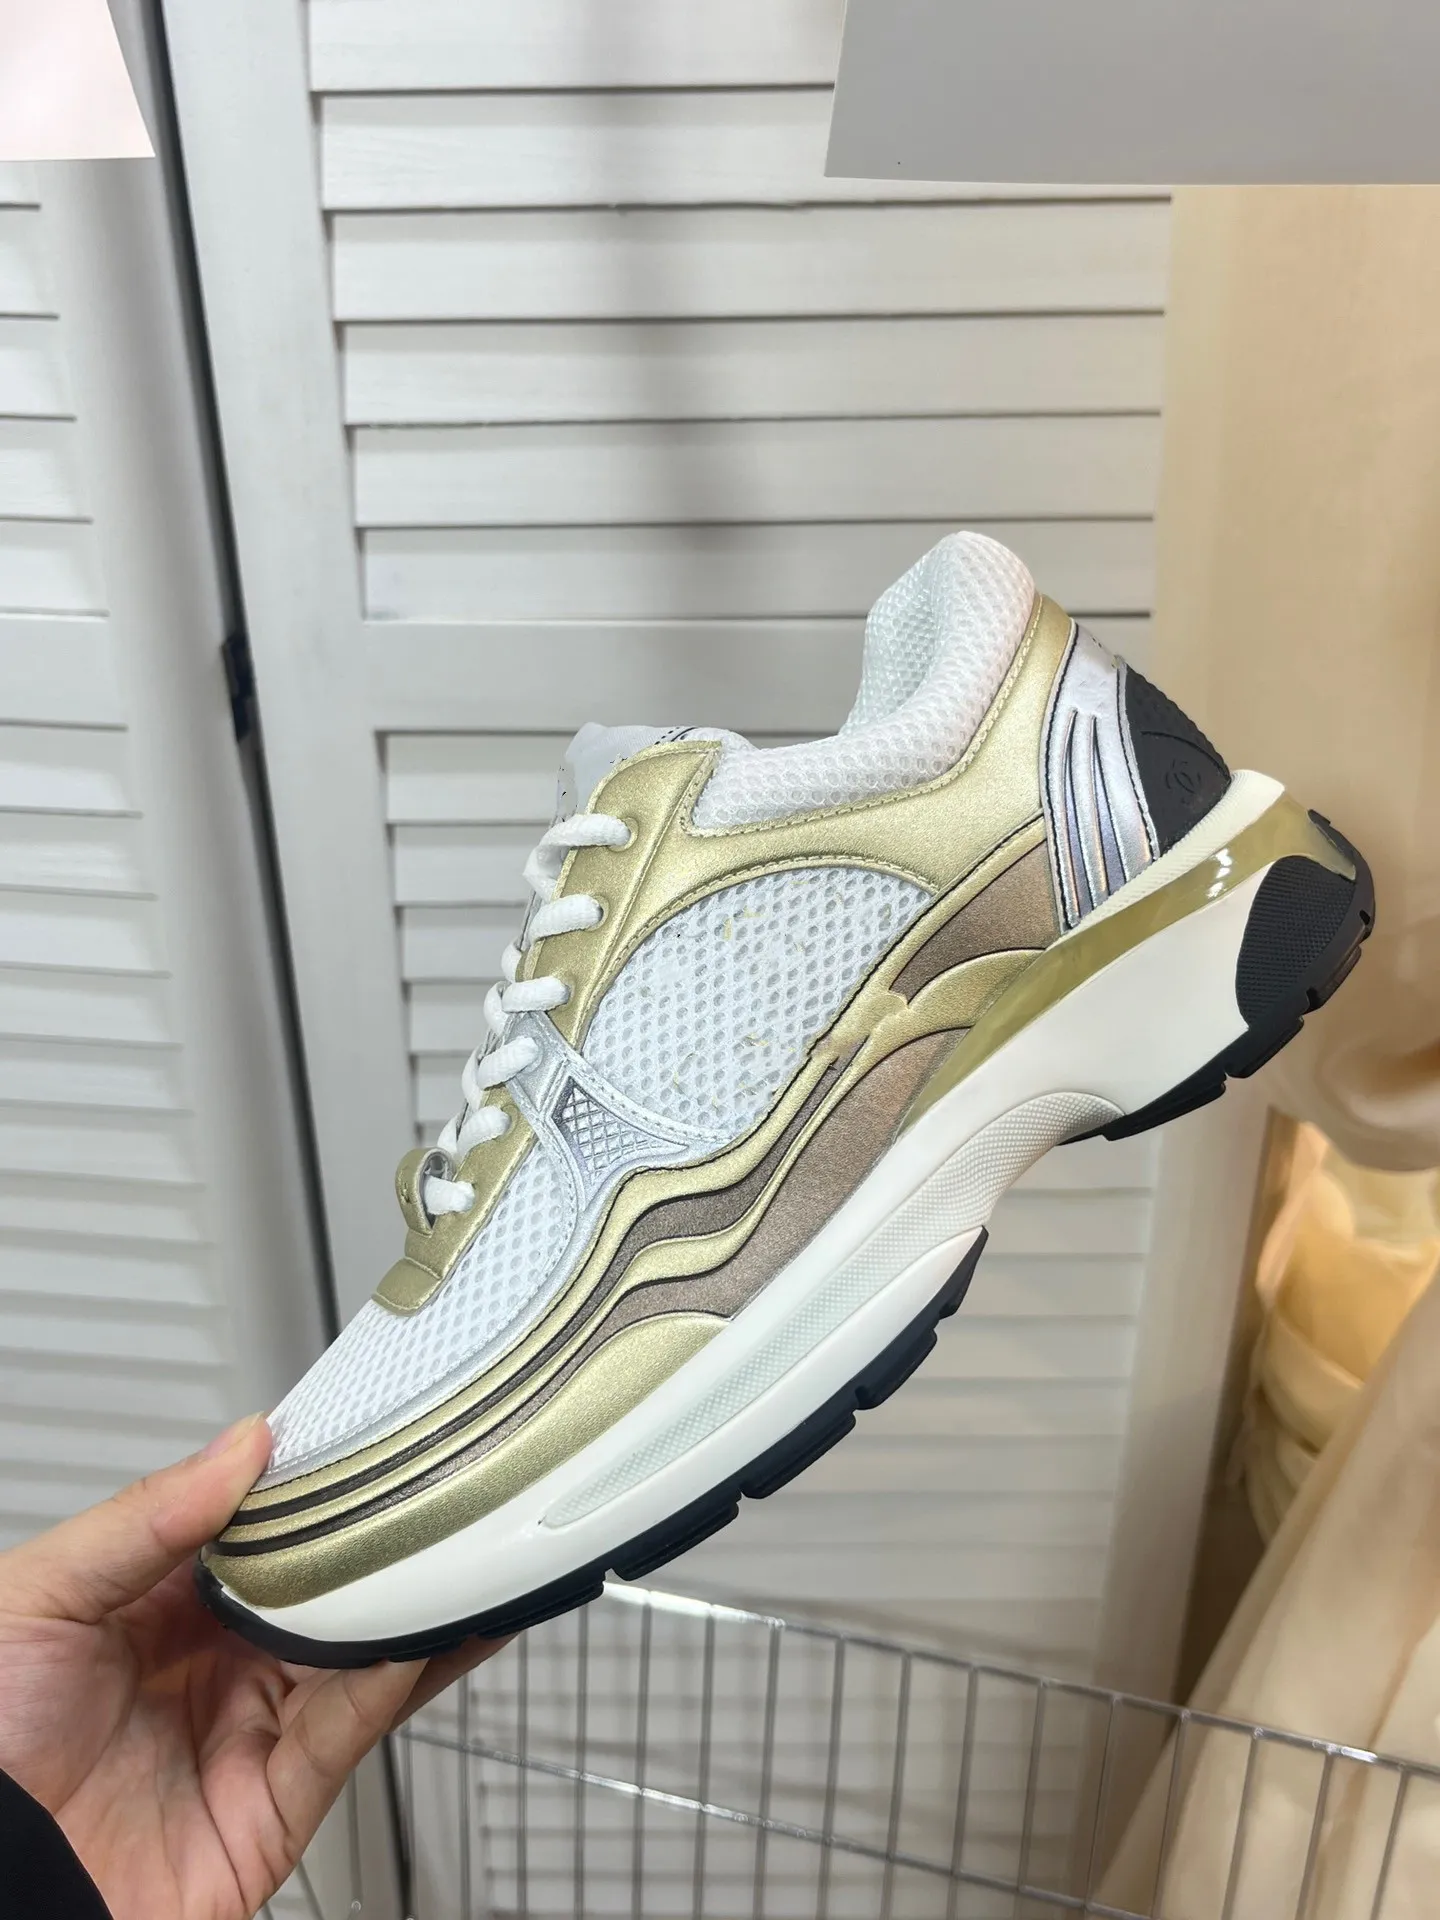 

2023 Designer Sneakers Gold and silver horn king Sandals Shoes The most popular casual shoes Plate-forme bapesta Casual Shoes trainers size 35-42 and men 38-46, #7